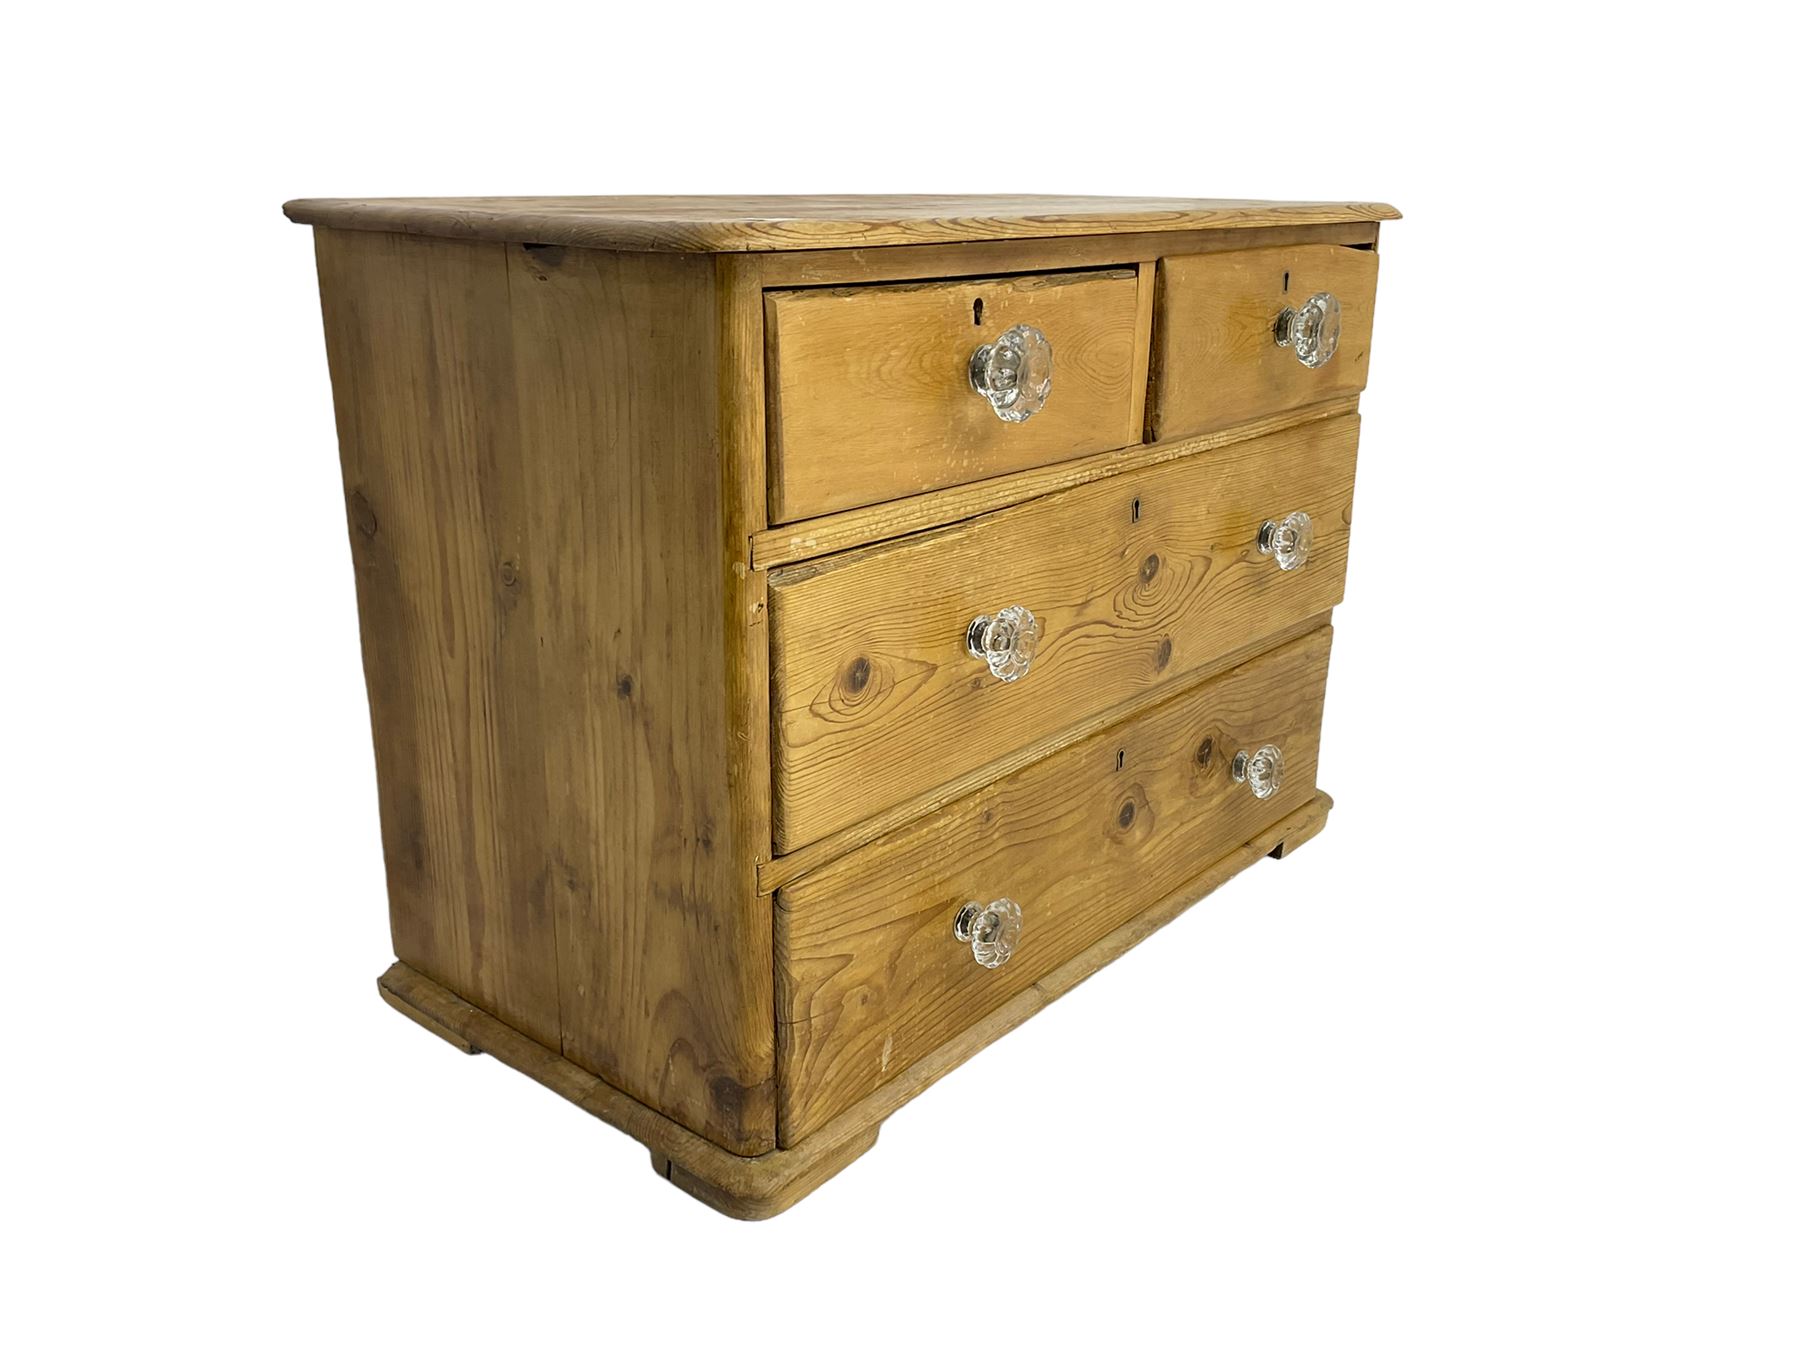 Victorian pine chest - Image 3 of 6